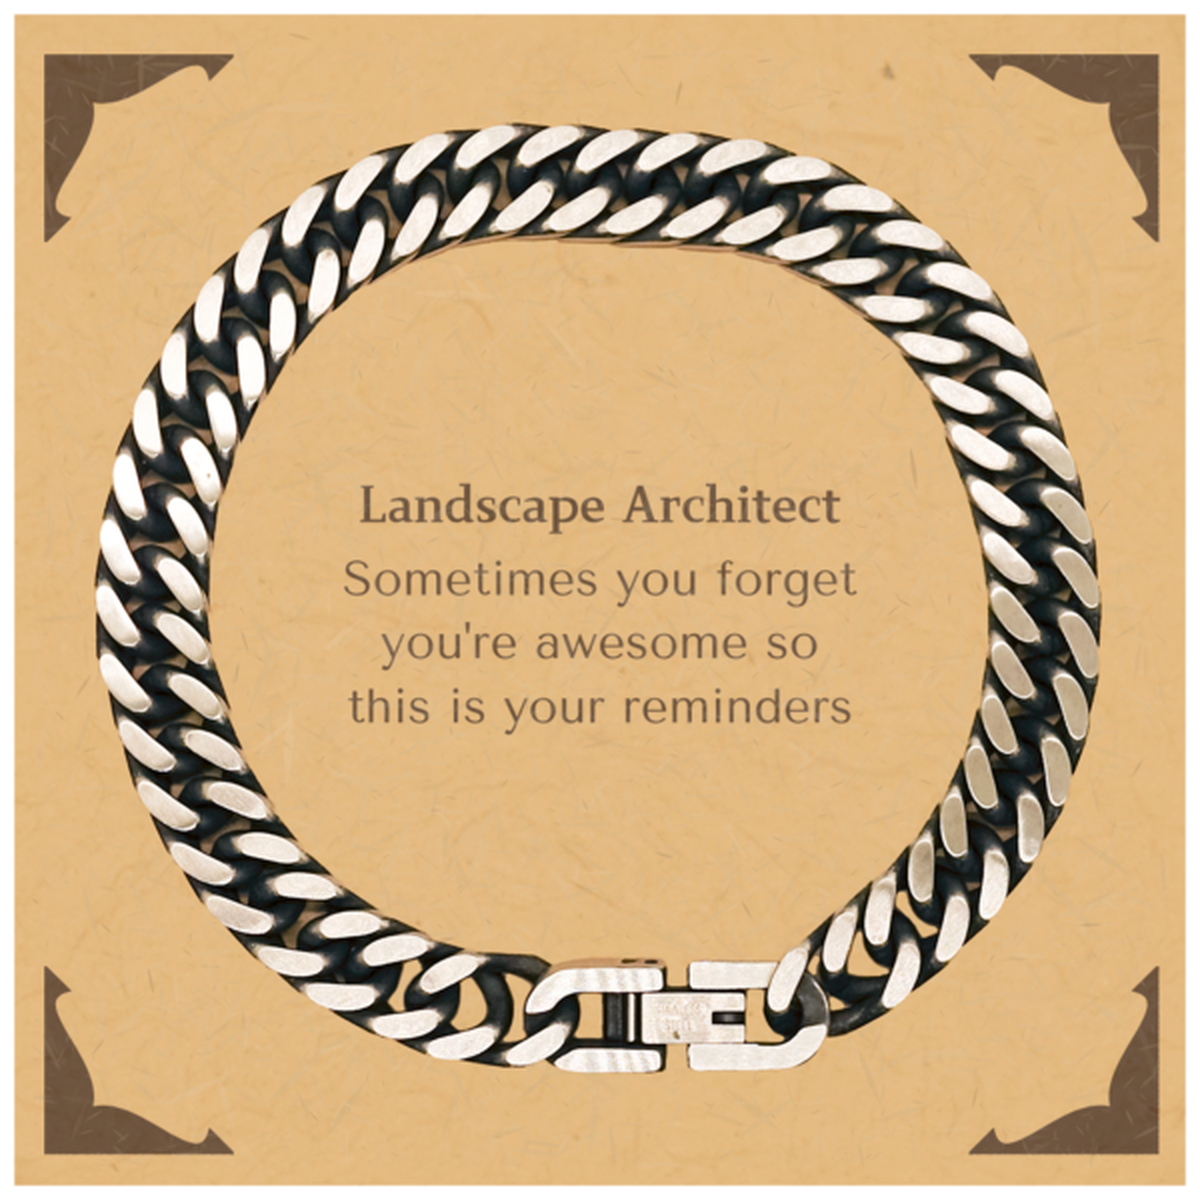 Sentimental Landscape Architect Cuban Link Chain Bracelet, Landscape Architect Sometimes you forget you're awesome so this is your reminders, Graduation Christmas Birthday Gifts for Landscape Architect, Men, Women, Coworkers